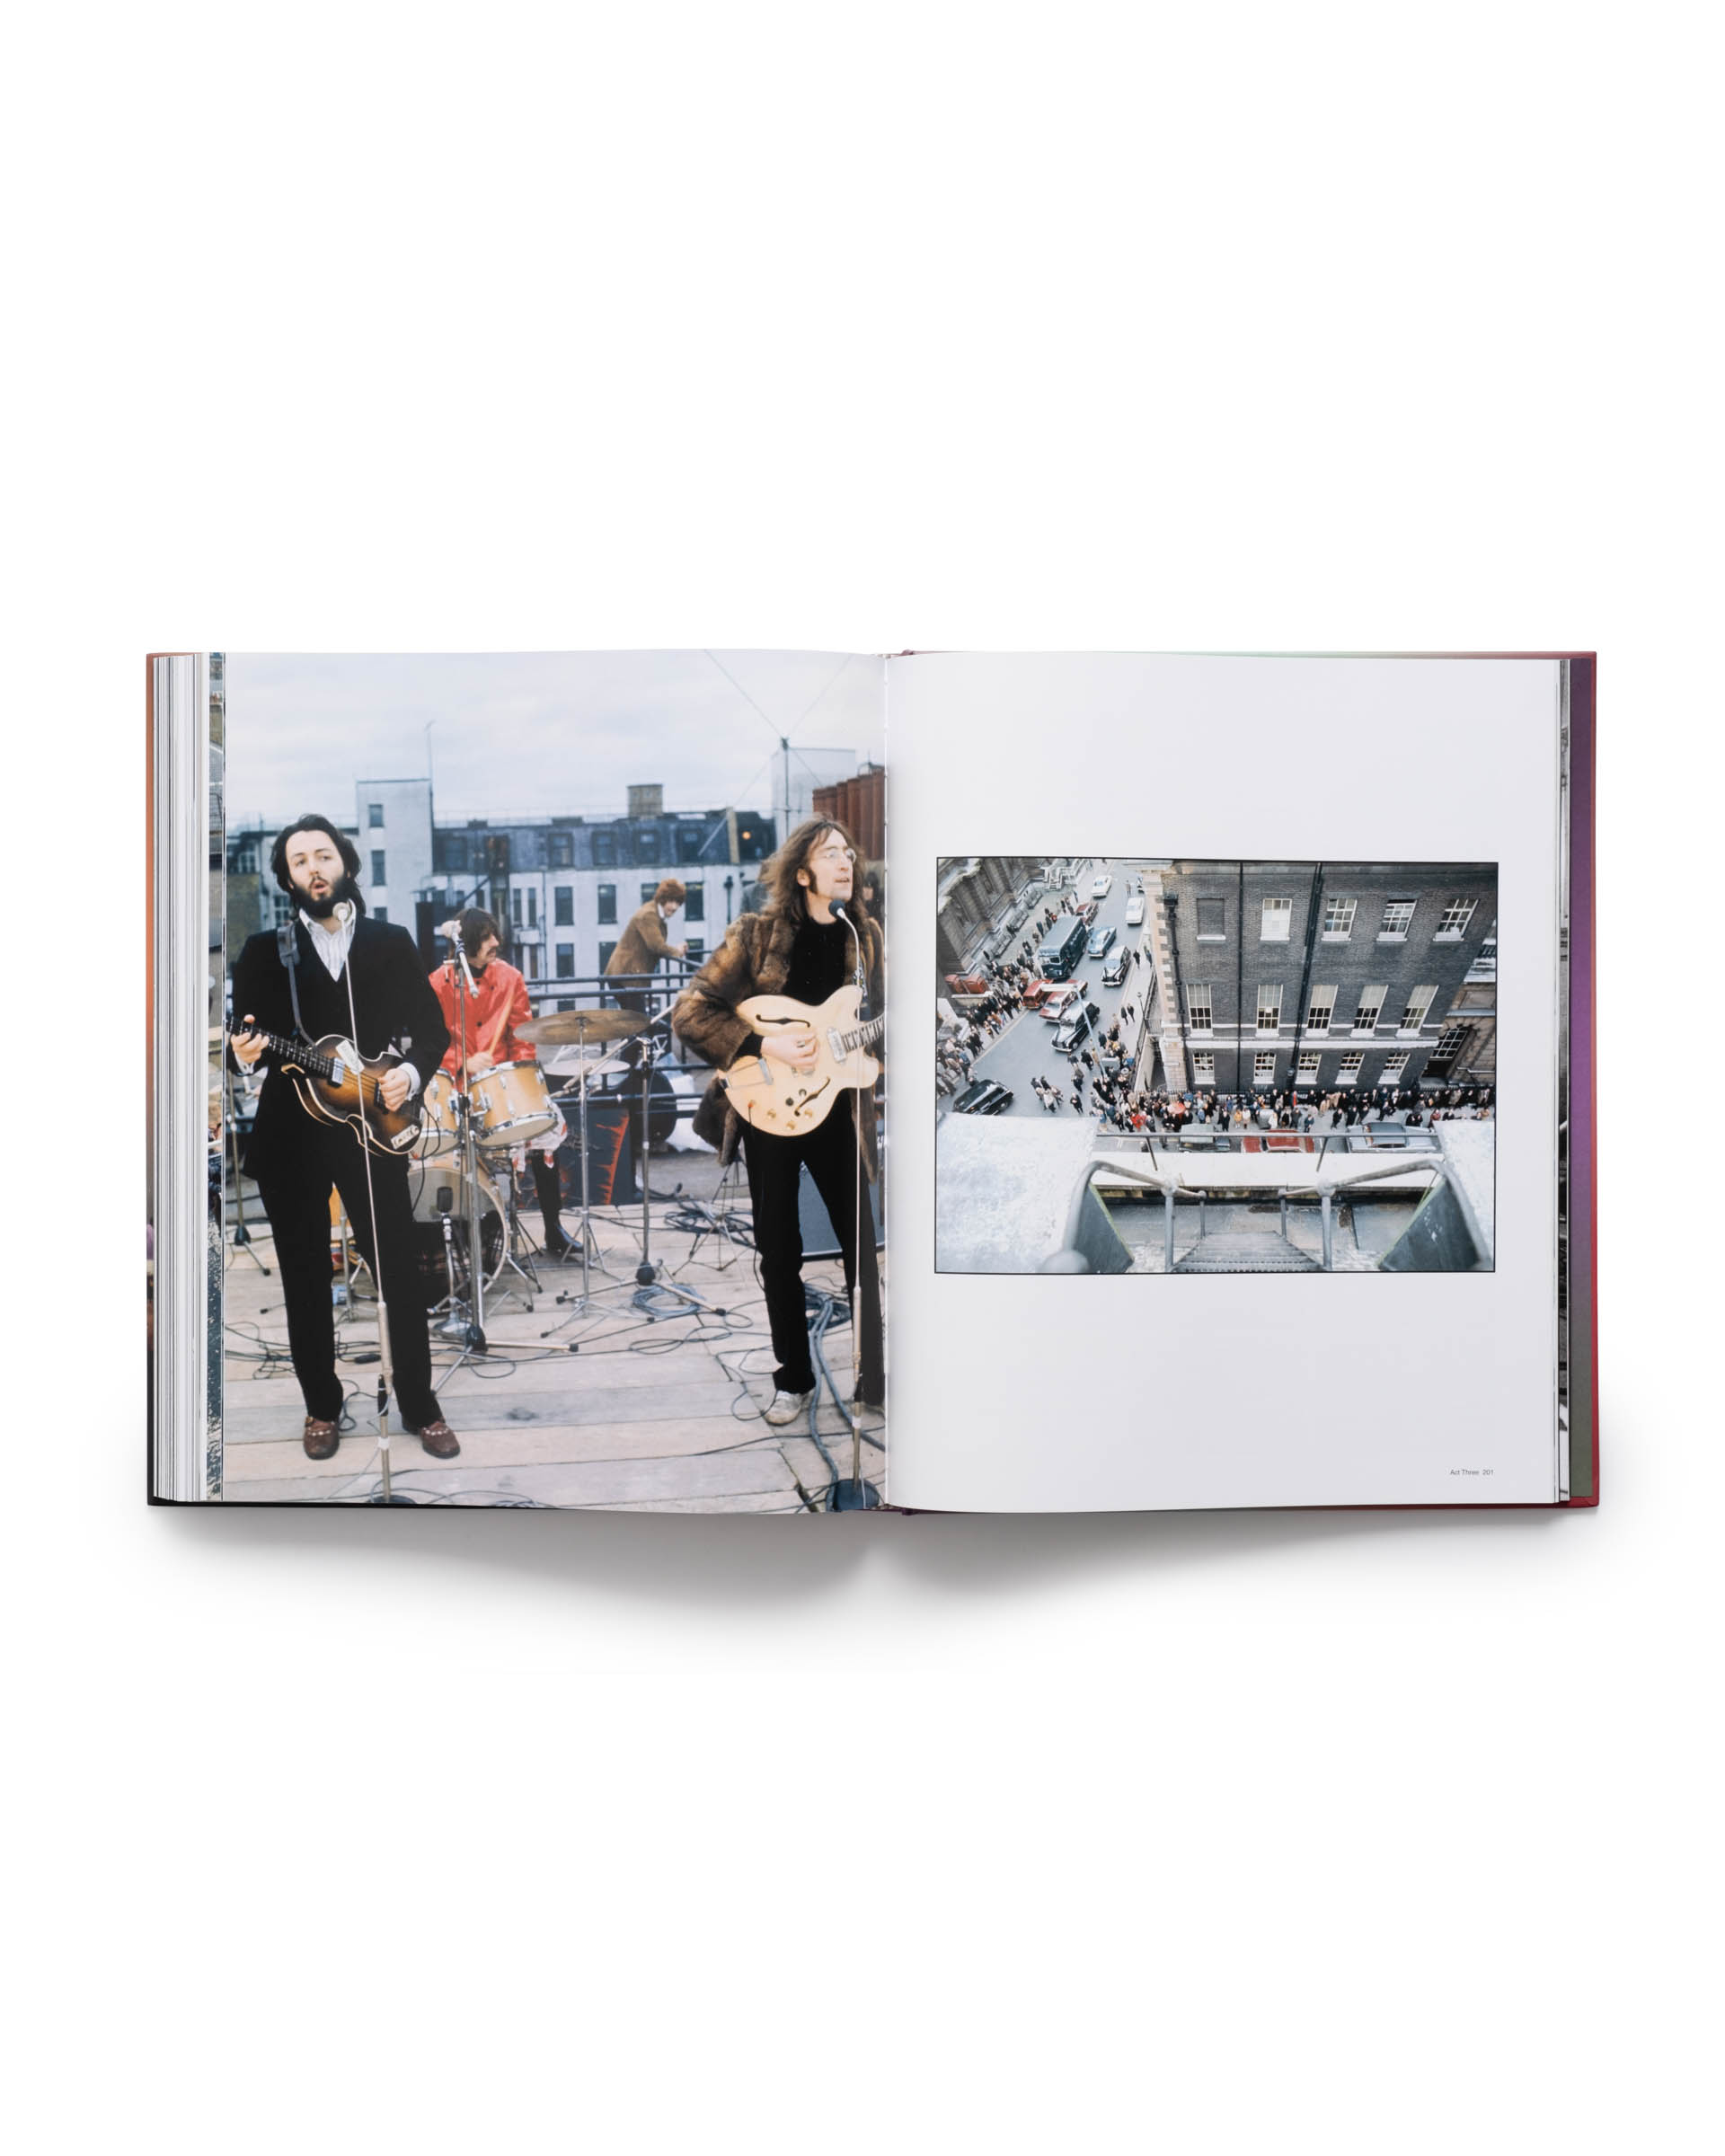 THE BEATLES: GET BACK Book 